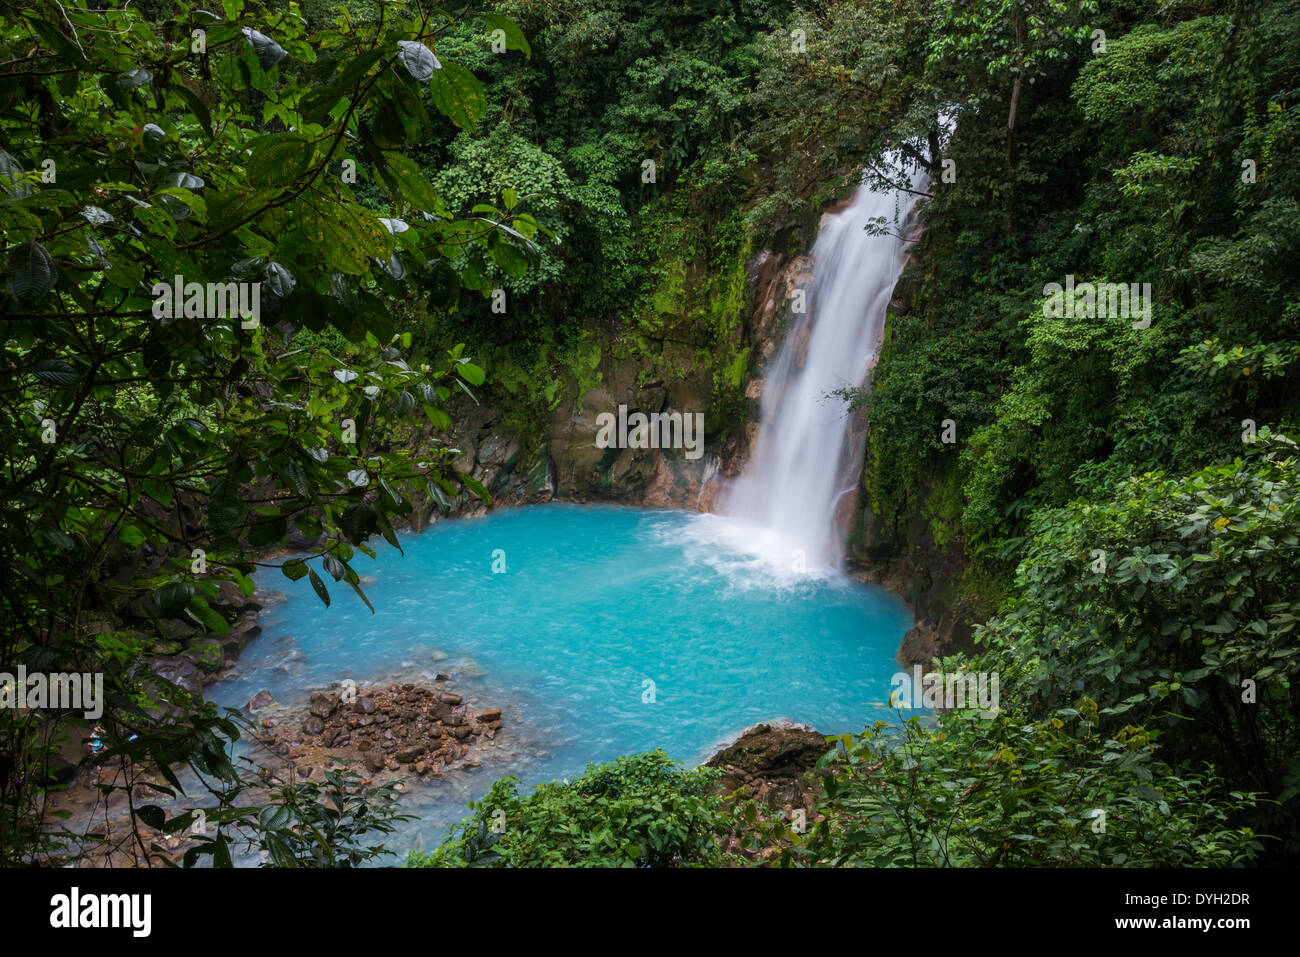 Signature turquoise blue water at the waterfall of the Rio Celeste, Tenorio Volcano National Park, Costa Rica. Stock Photo